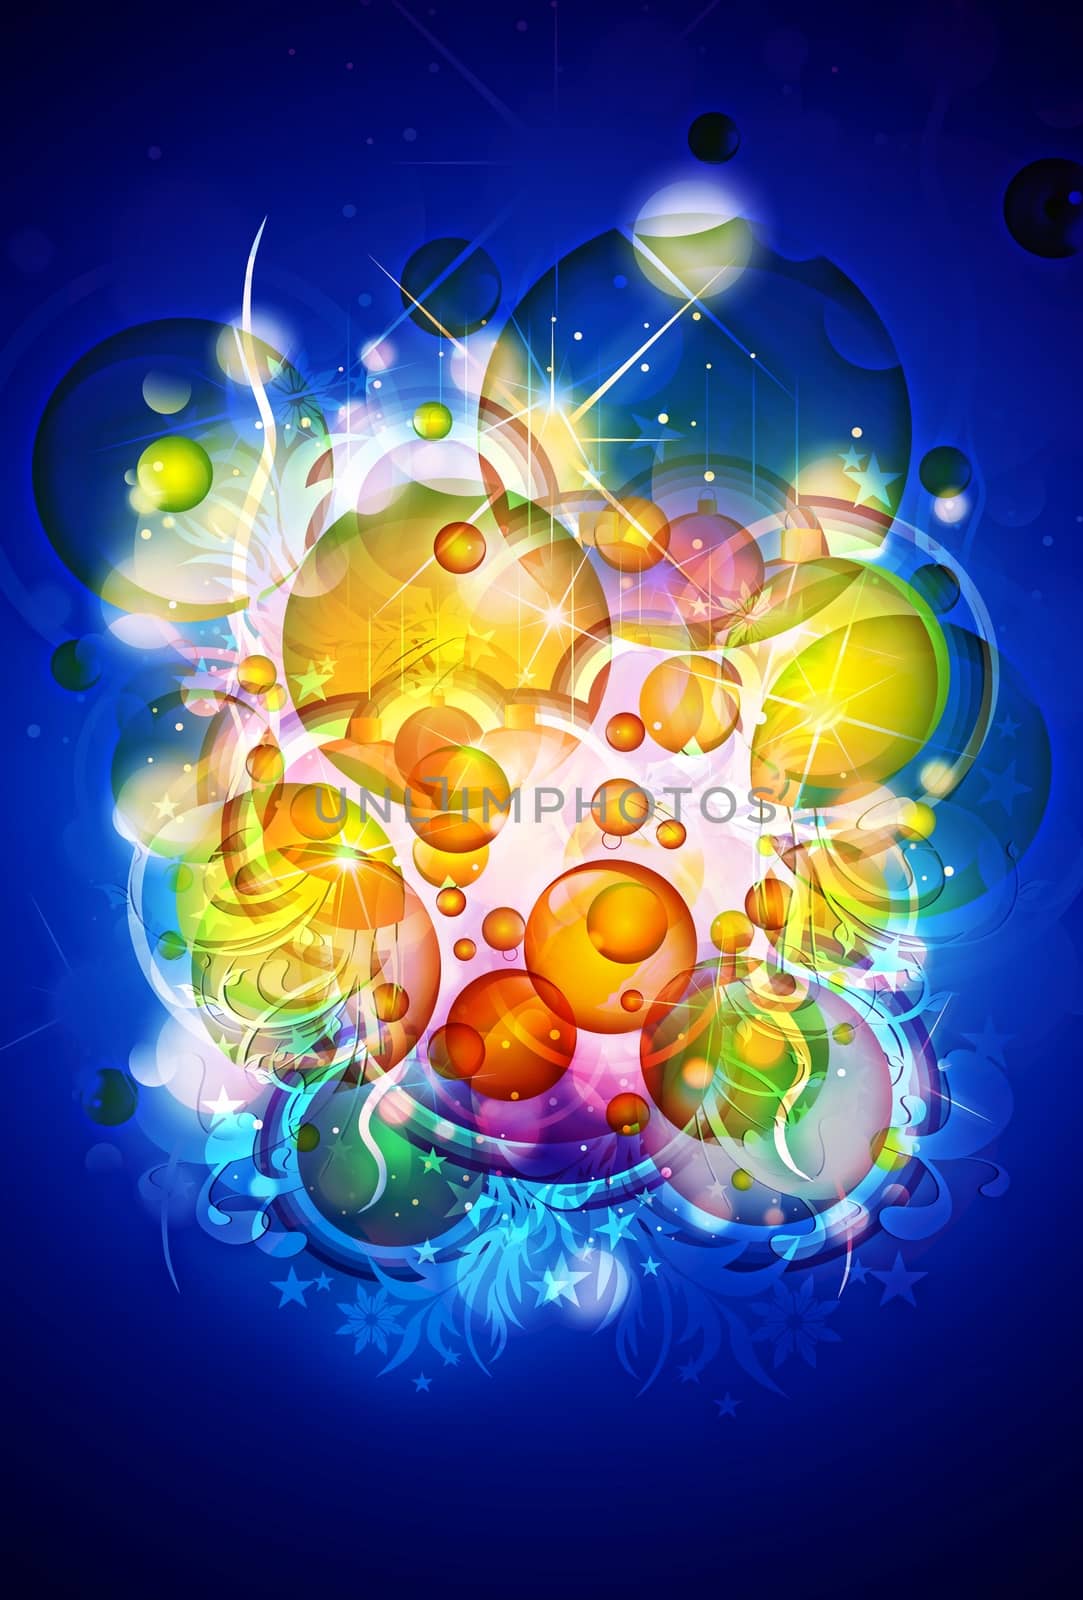 Colorful Abstract Design - Dark Blue Background. Abstract Colorful Illustration.